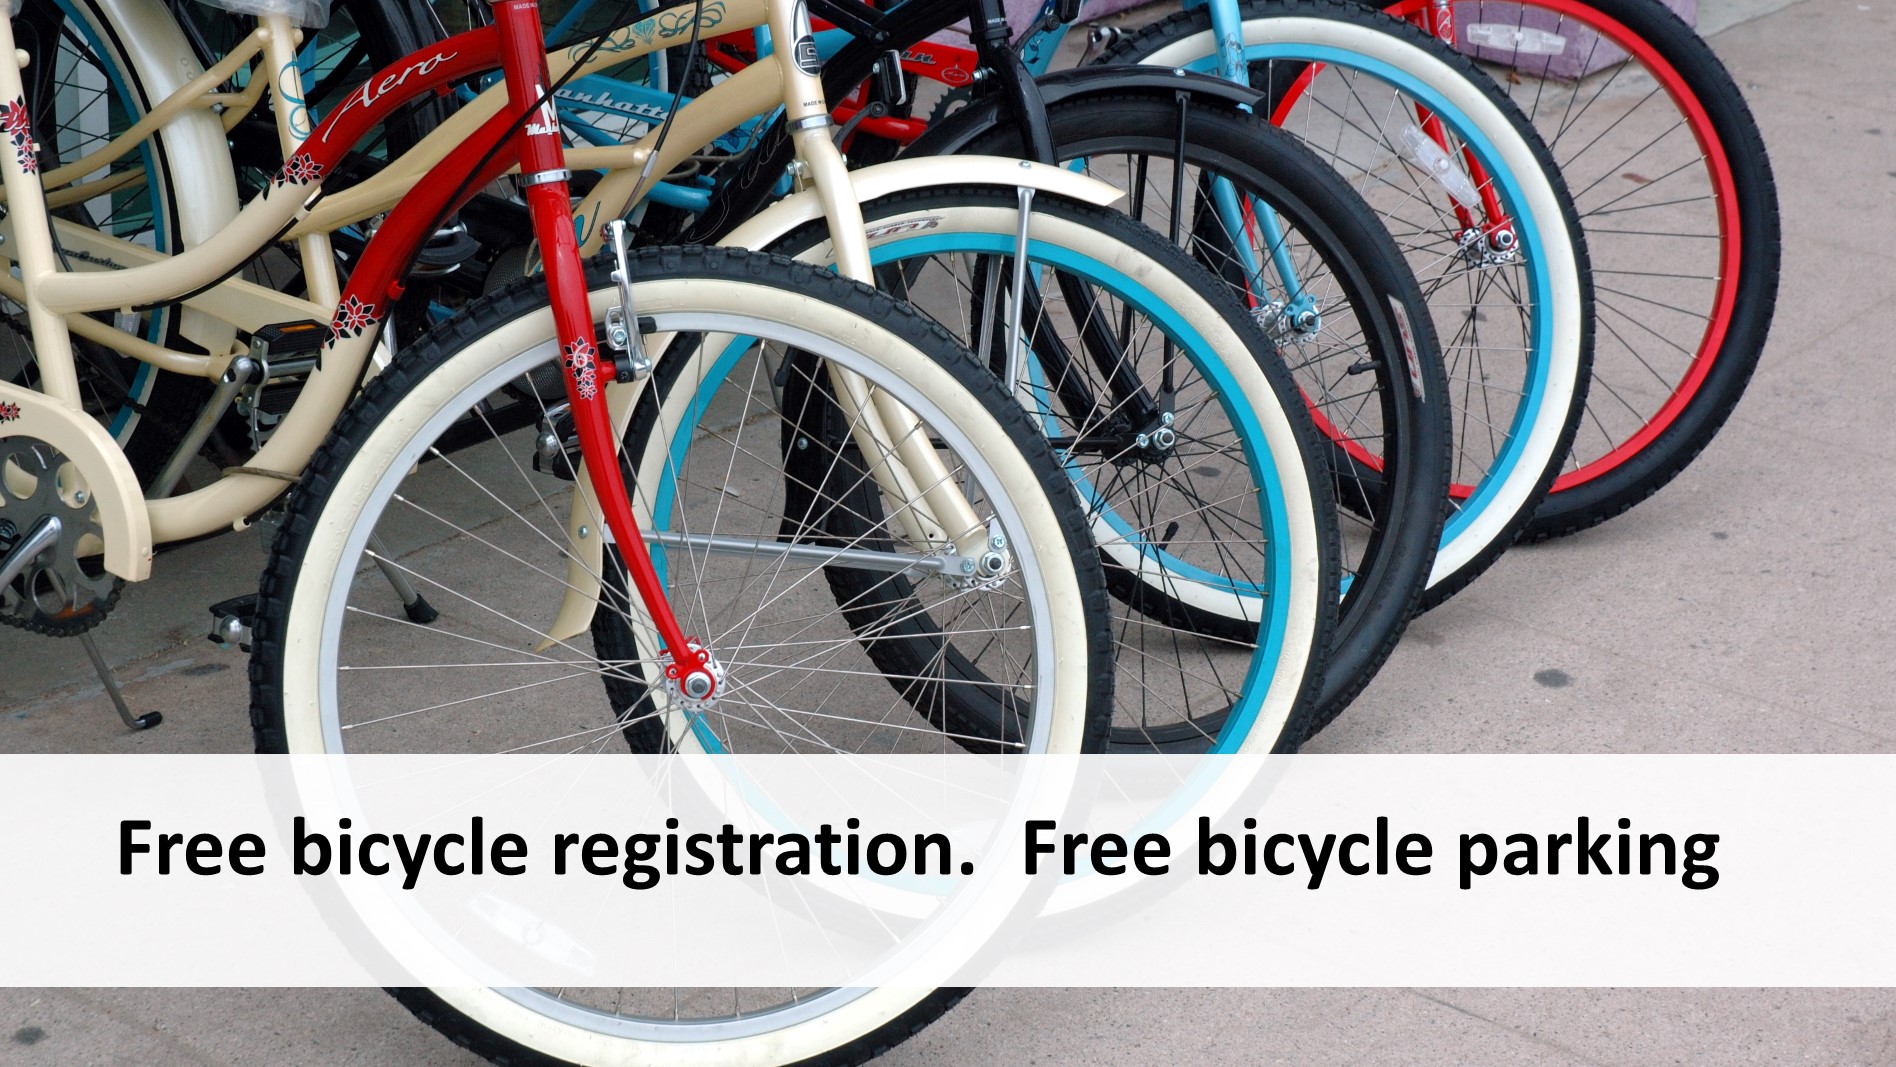 Free bicycle registration and parking